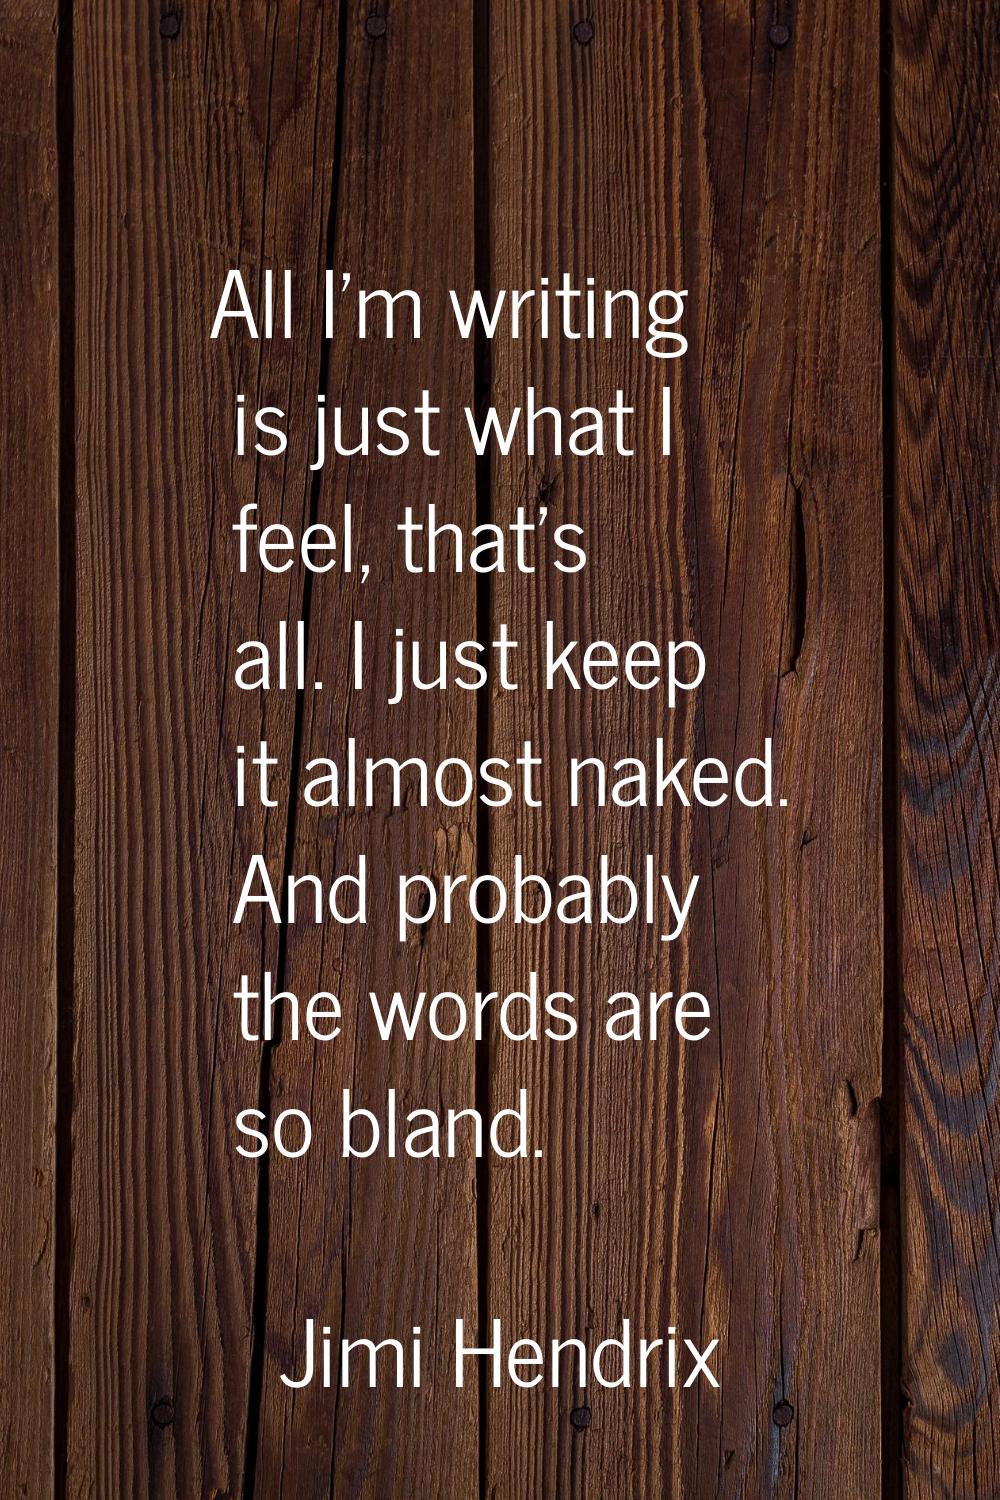 All I'm writing is just what I feel, that's all. I just keep it almost naked. And probably the word